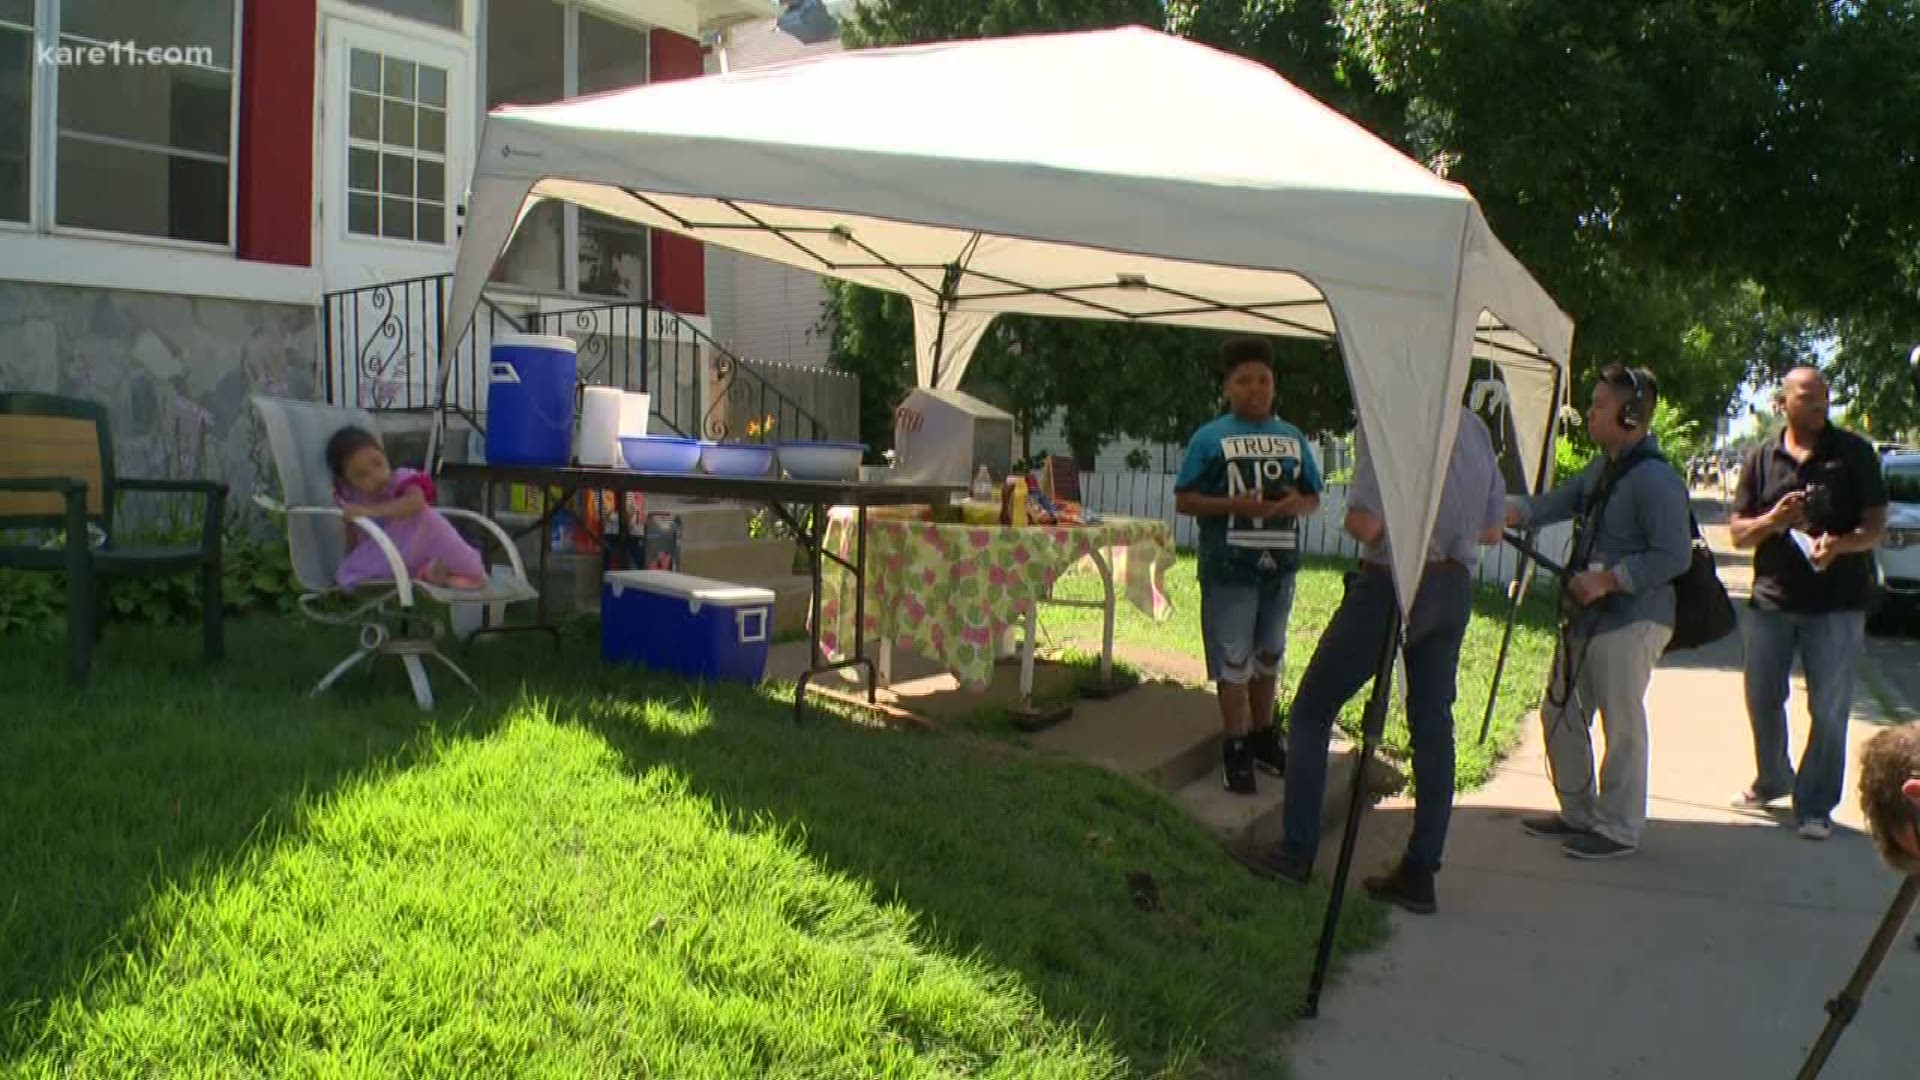 A business savvy Minneapolis boy is selling hot dogs to make extra summer cash to buy school clothes. Word got around fast, including to the Minneapolis Health Department where a complaint was made. Hearing that the hot dog stand might get shut down, some